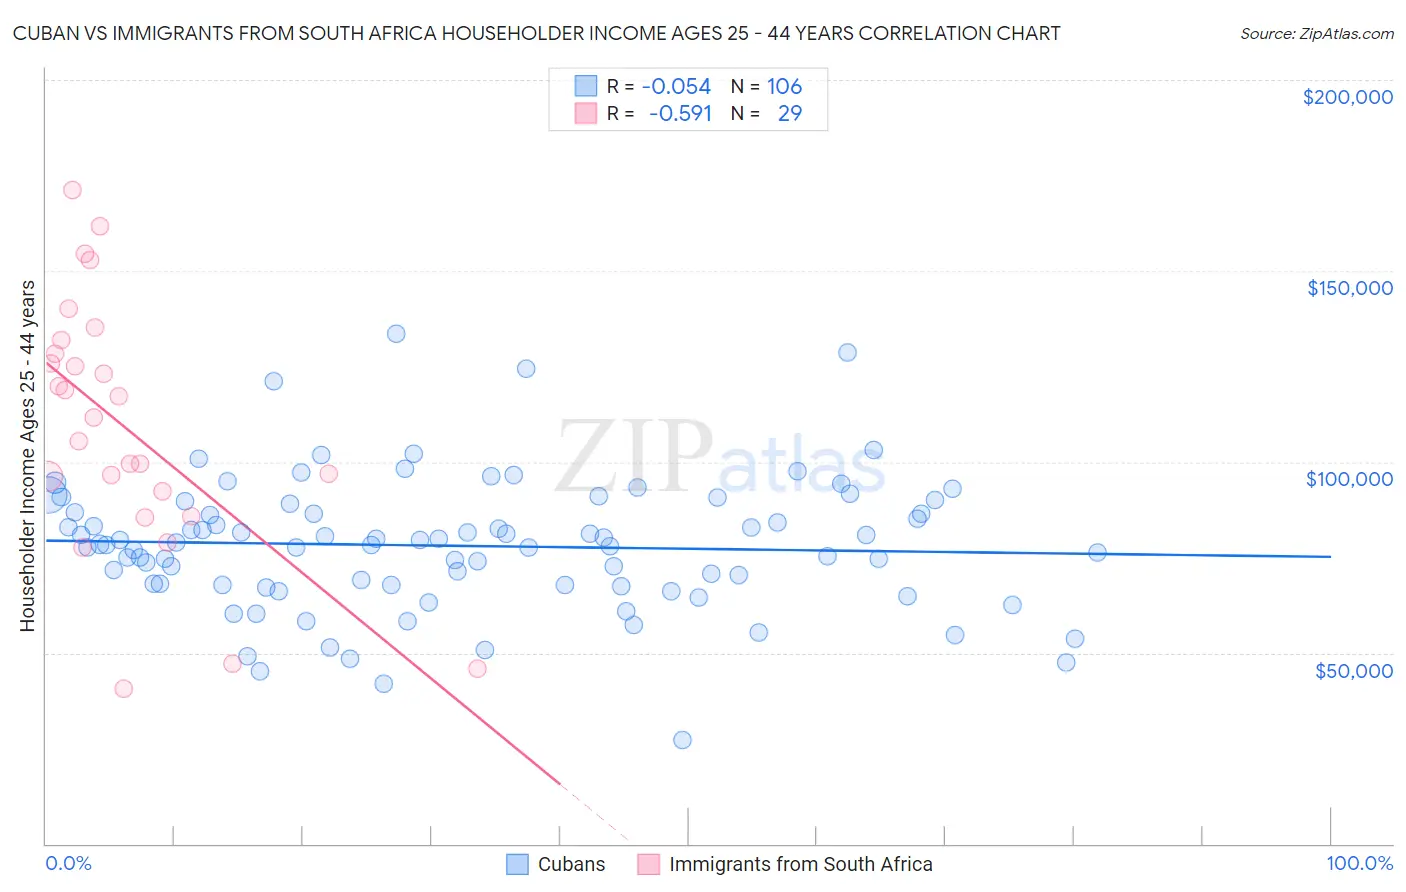 Cuban vs Immigrants from South Africa Householder Income Ages 25 - 44 years